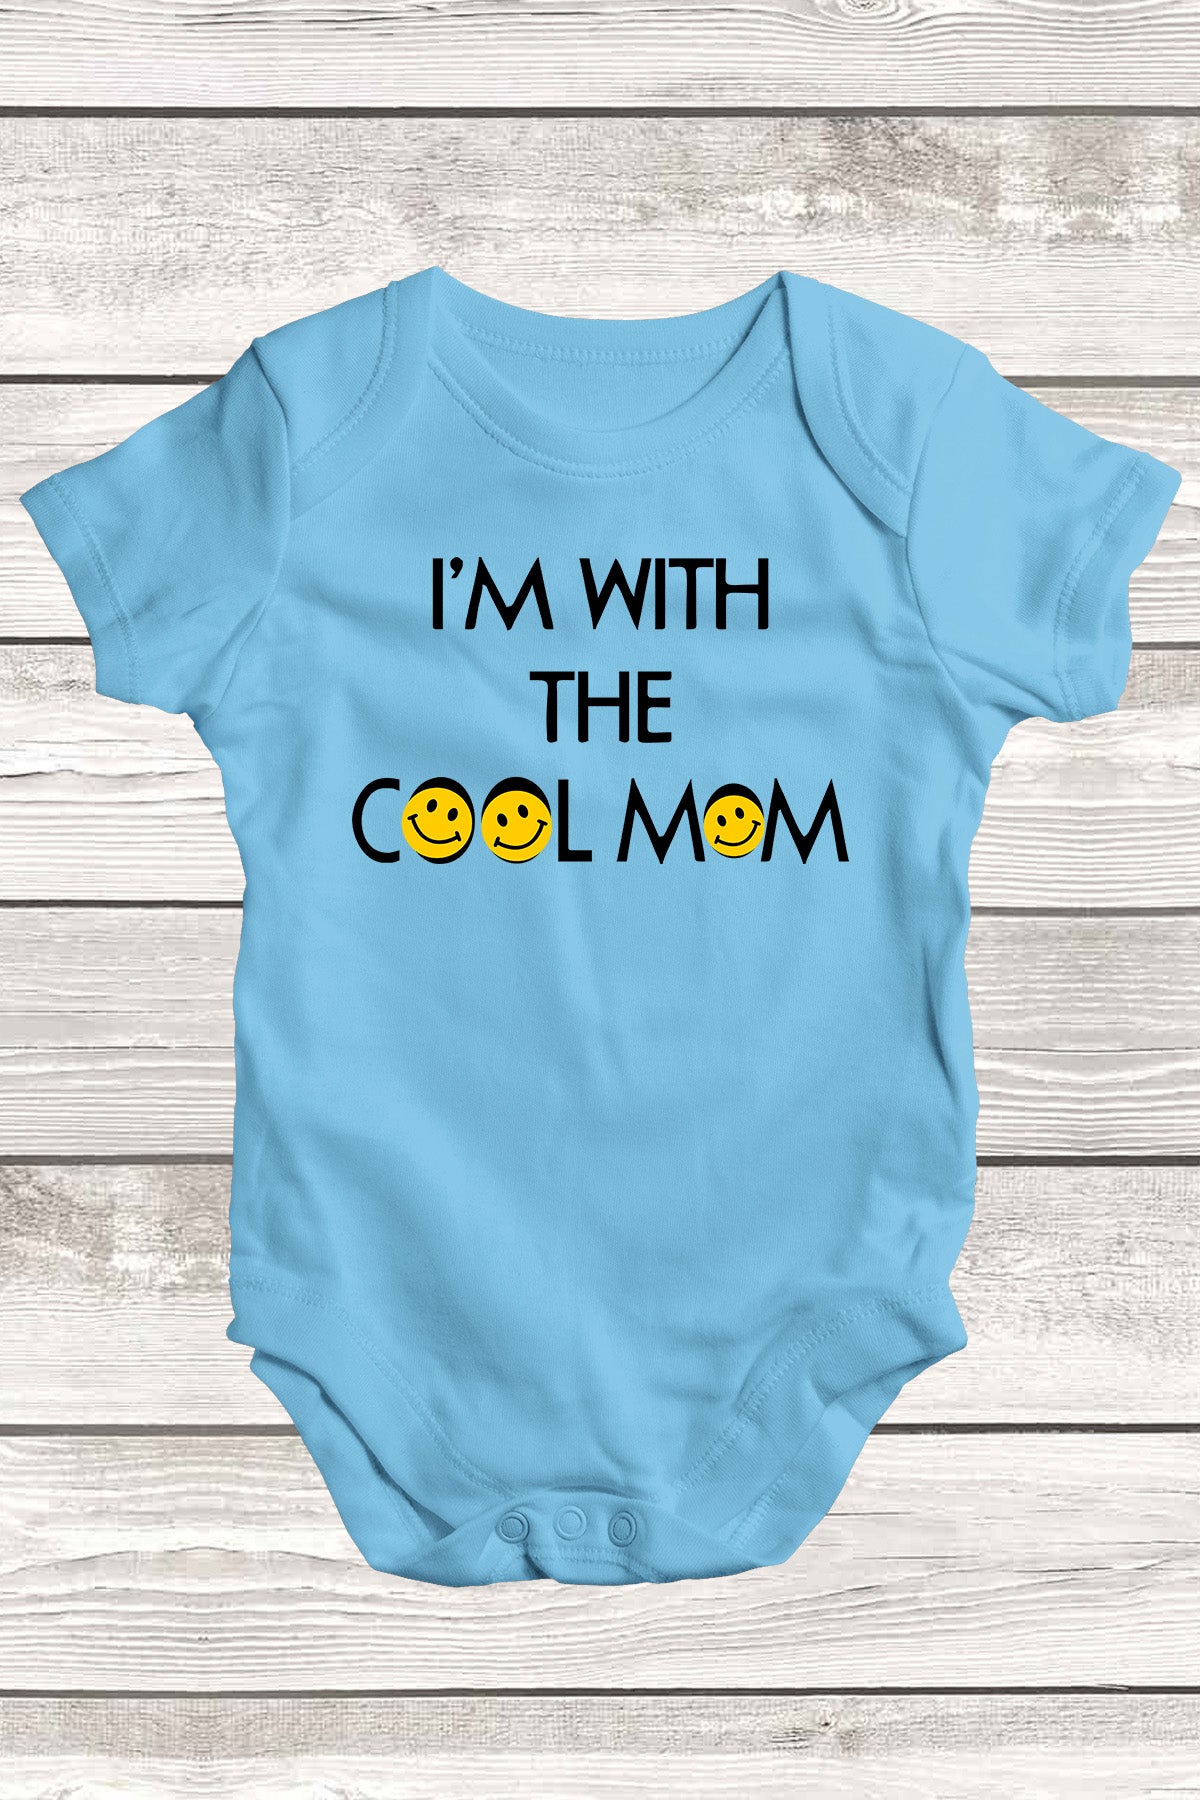 I'm With The Cool Mom Baby Bodysuit